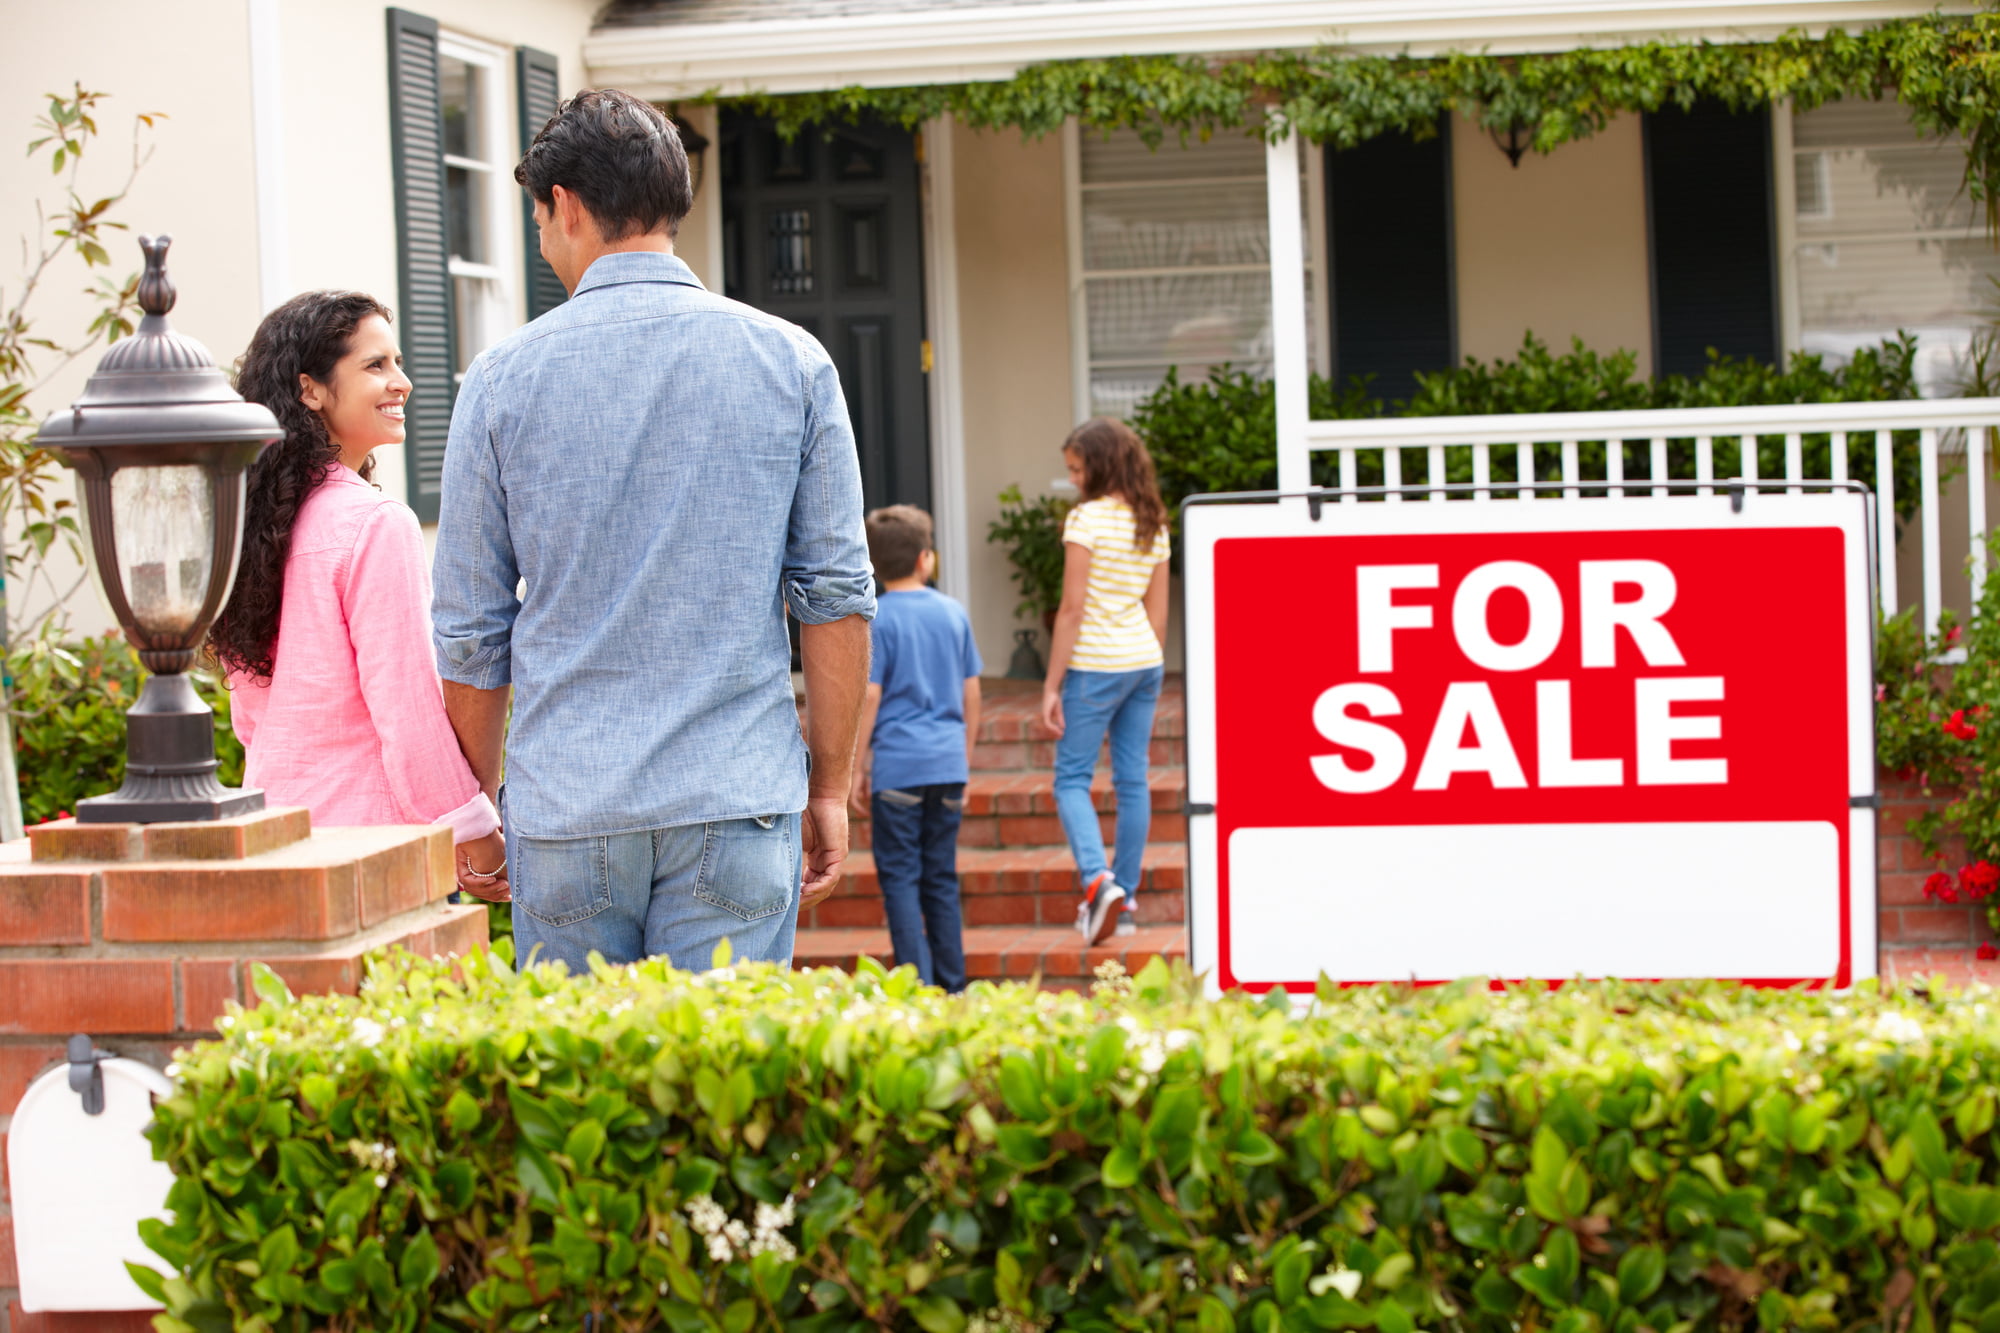 Just what is a buyer's market? If you're looking to sell your home, then you need to know how to sell in a buyer's market.